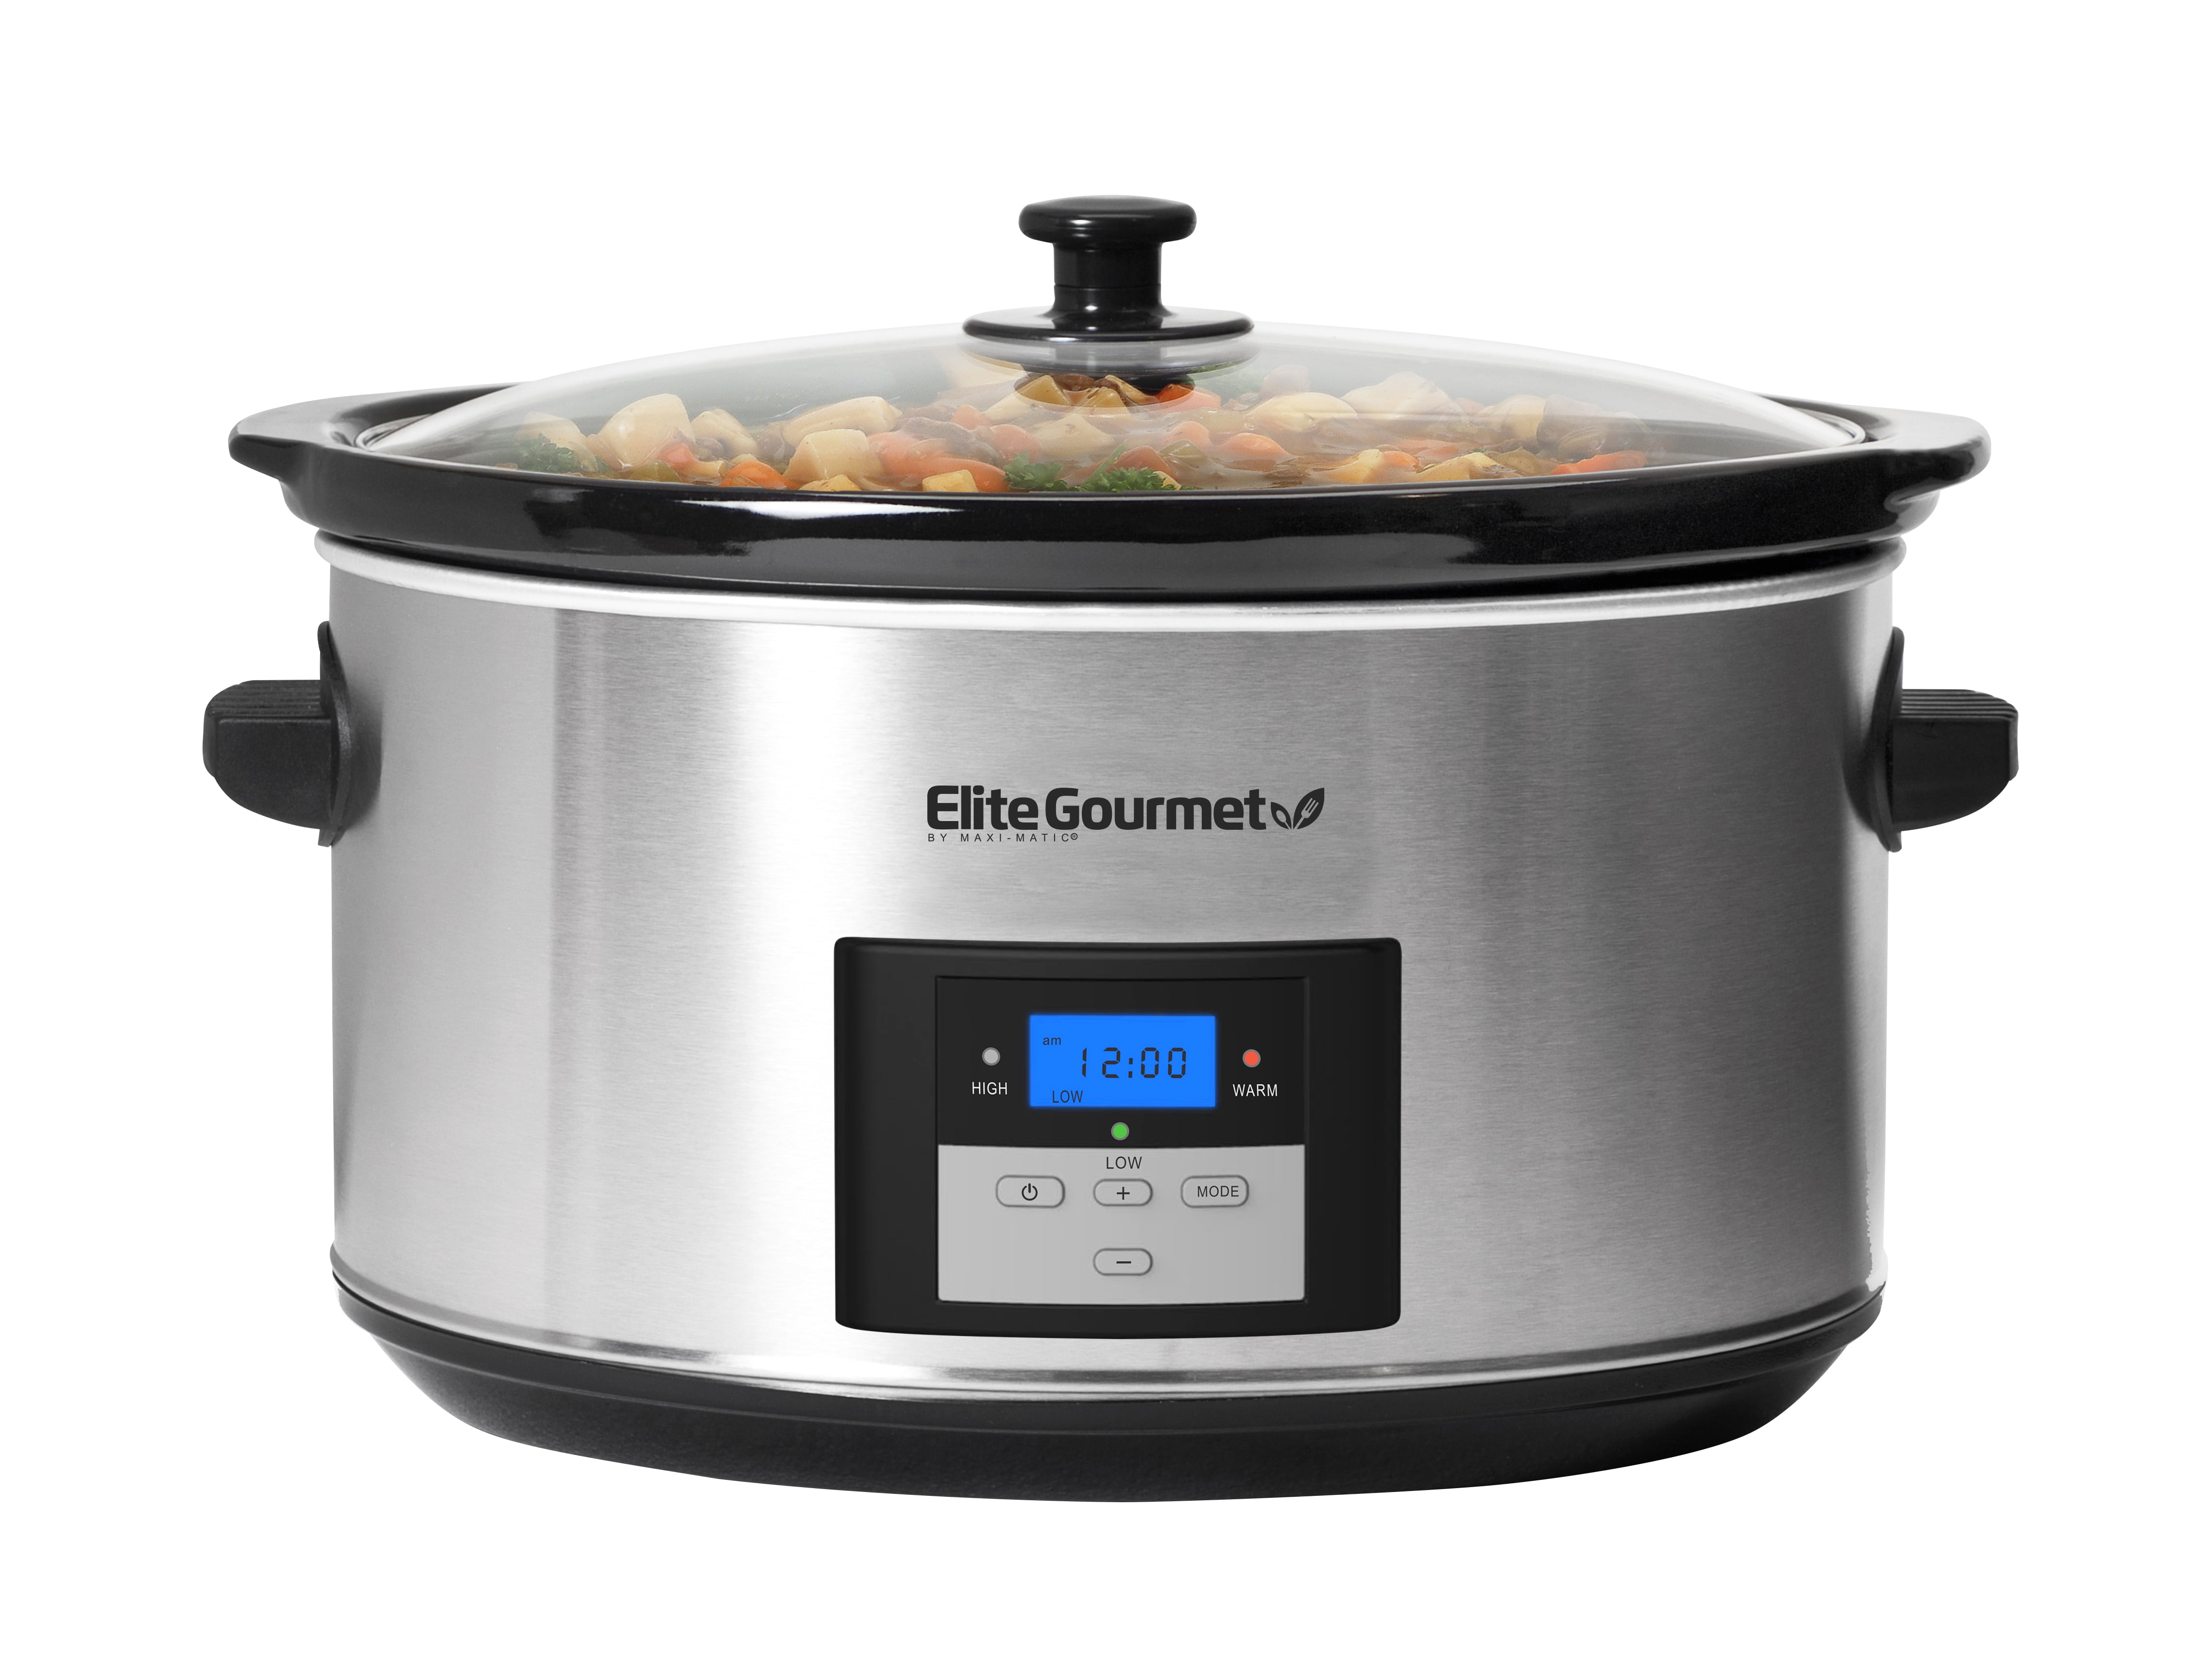 Costway 6 Qt. 4-in-1 Stainless Steel Slow Cooker